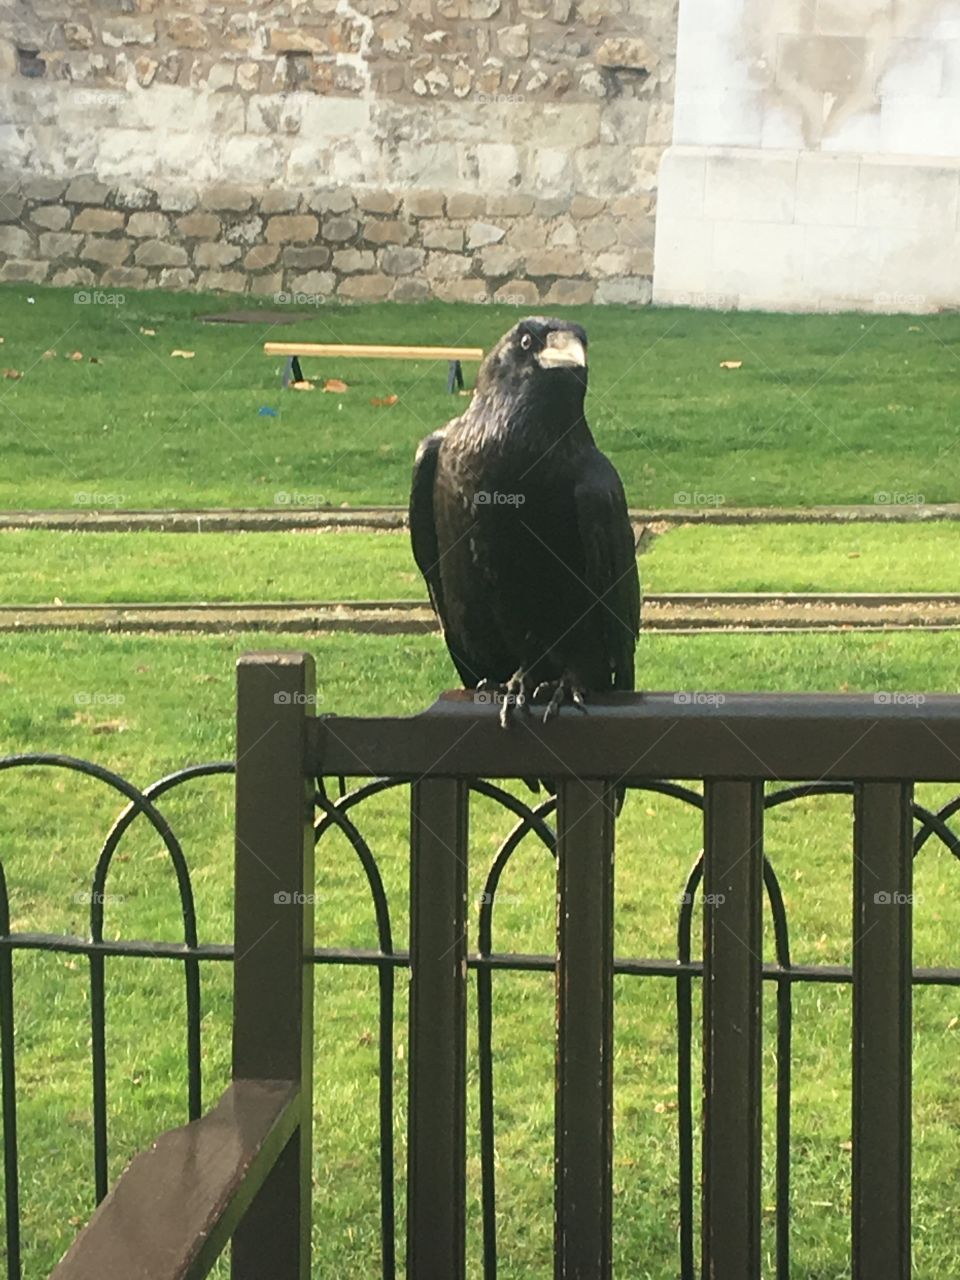 A London crow by the London tower 